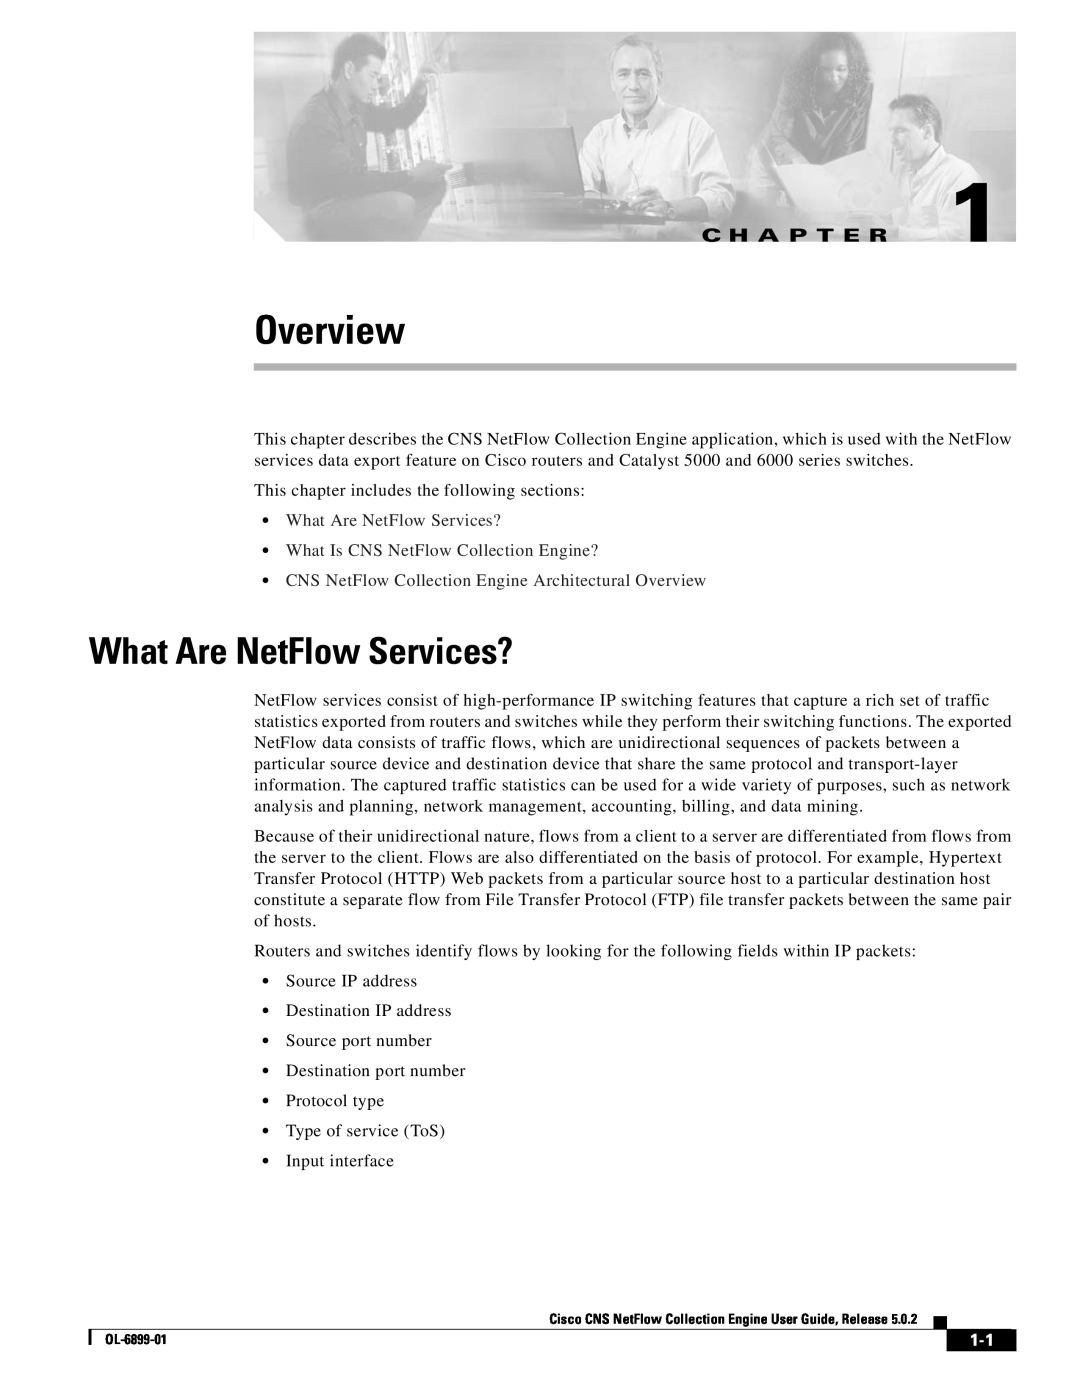 Cisco Systems OL-6900-01 manual Overview, What Are NetFlow Services?, C H A P T E R 